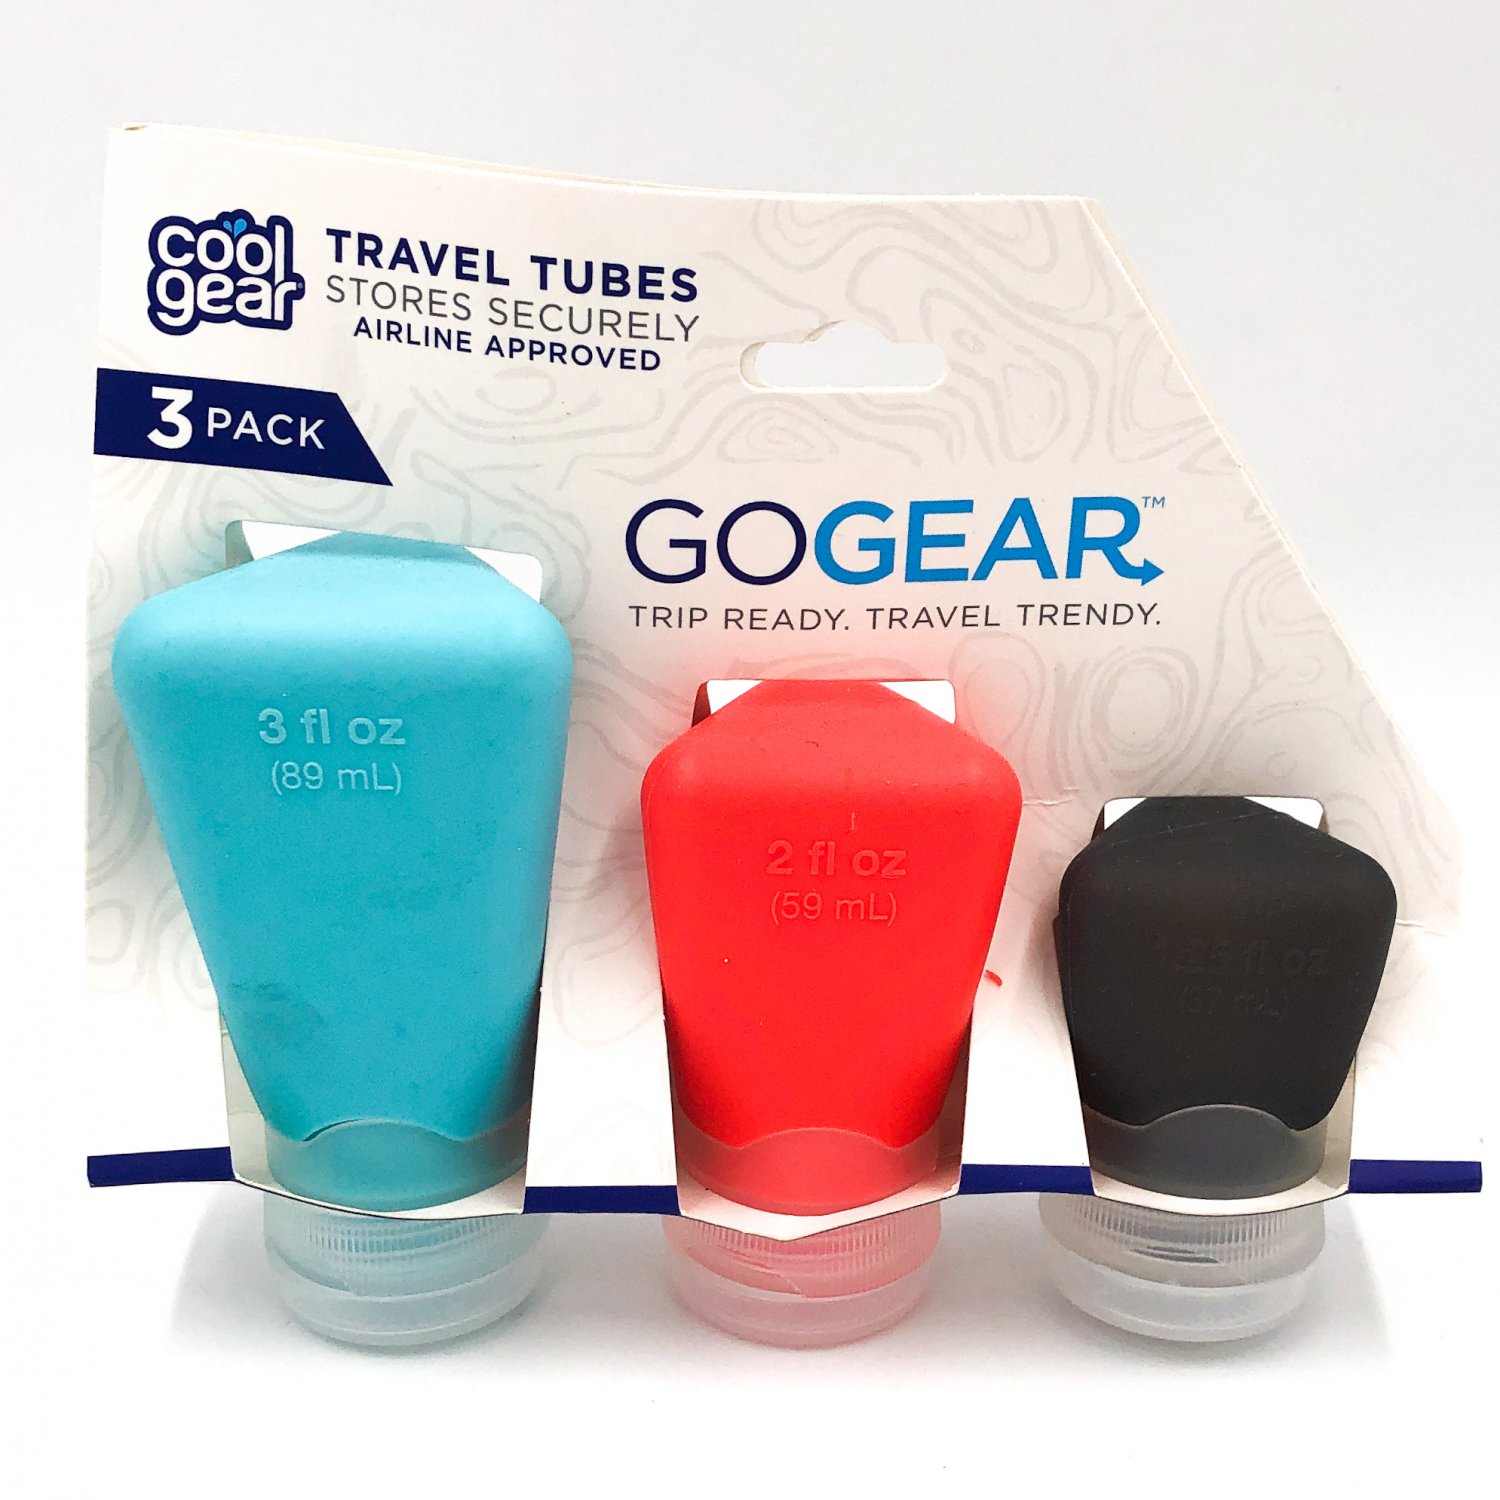 cool gear travel tubes